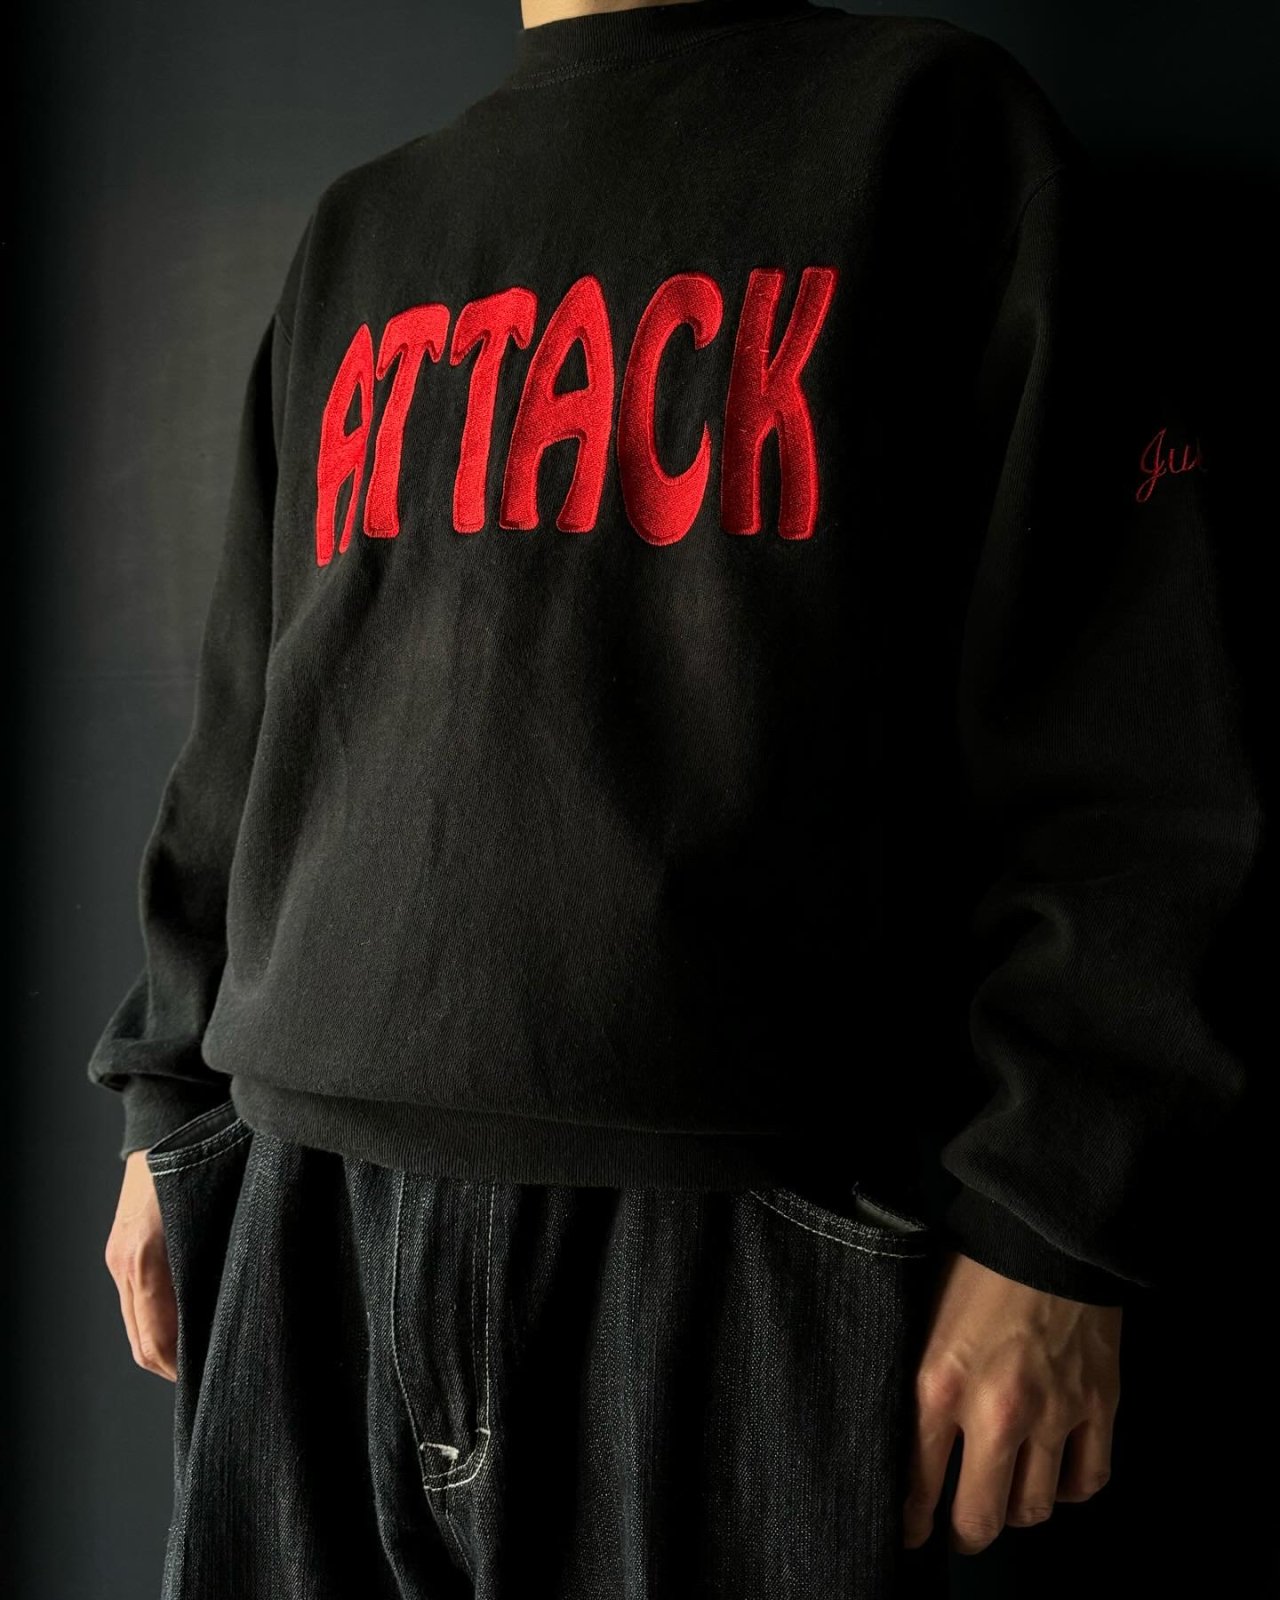 ATTACK embroidered